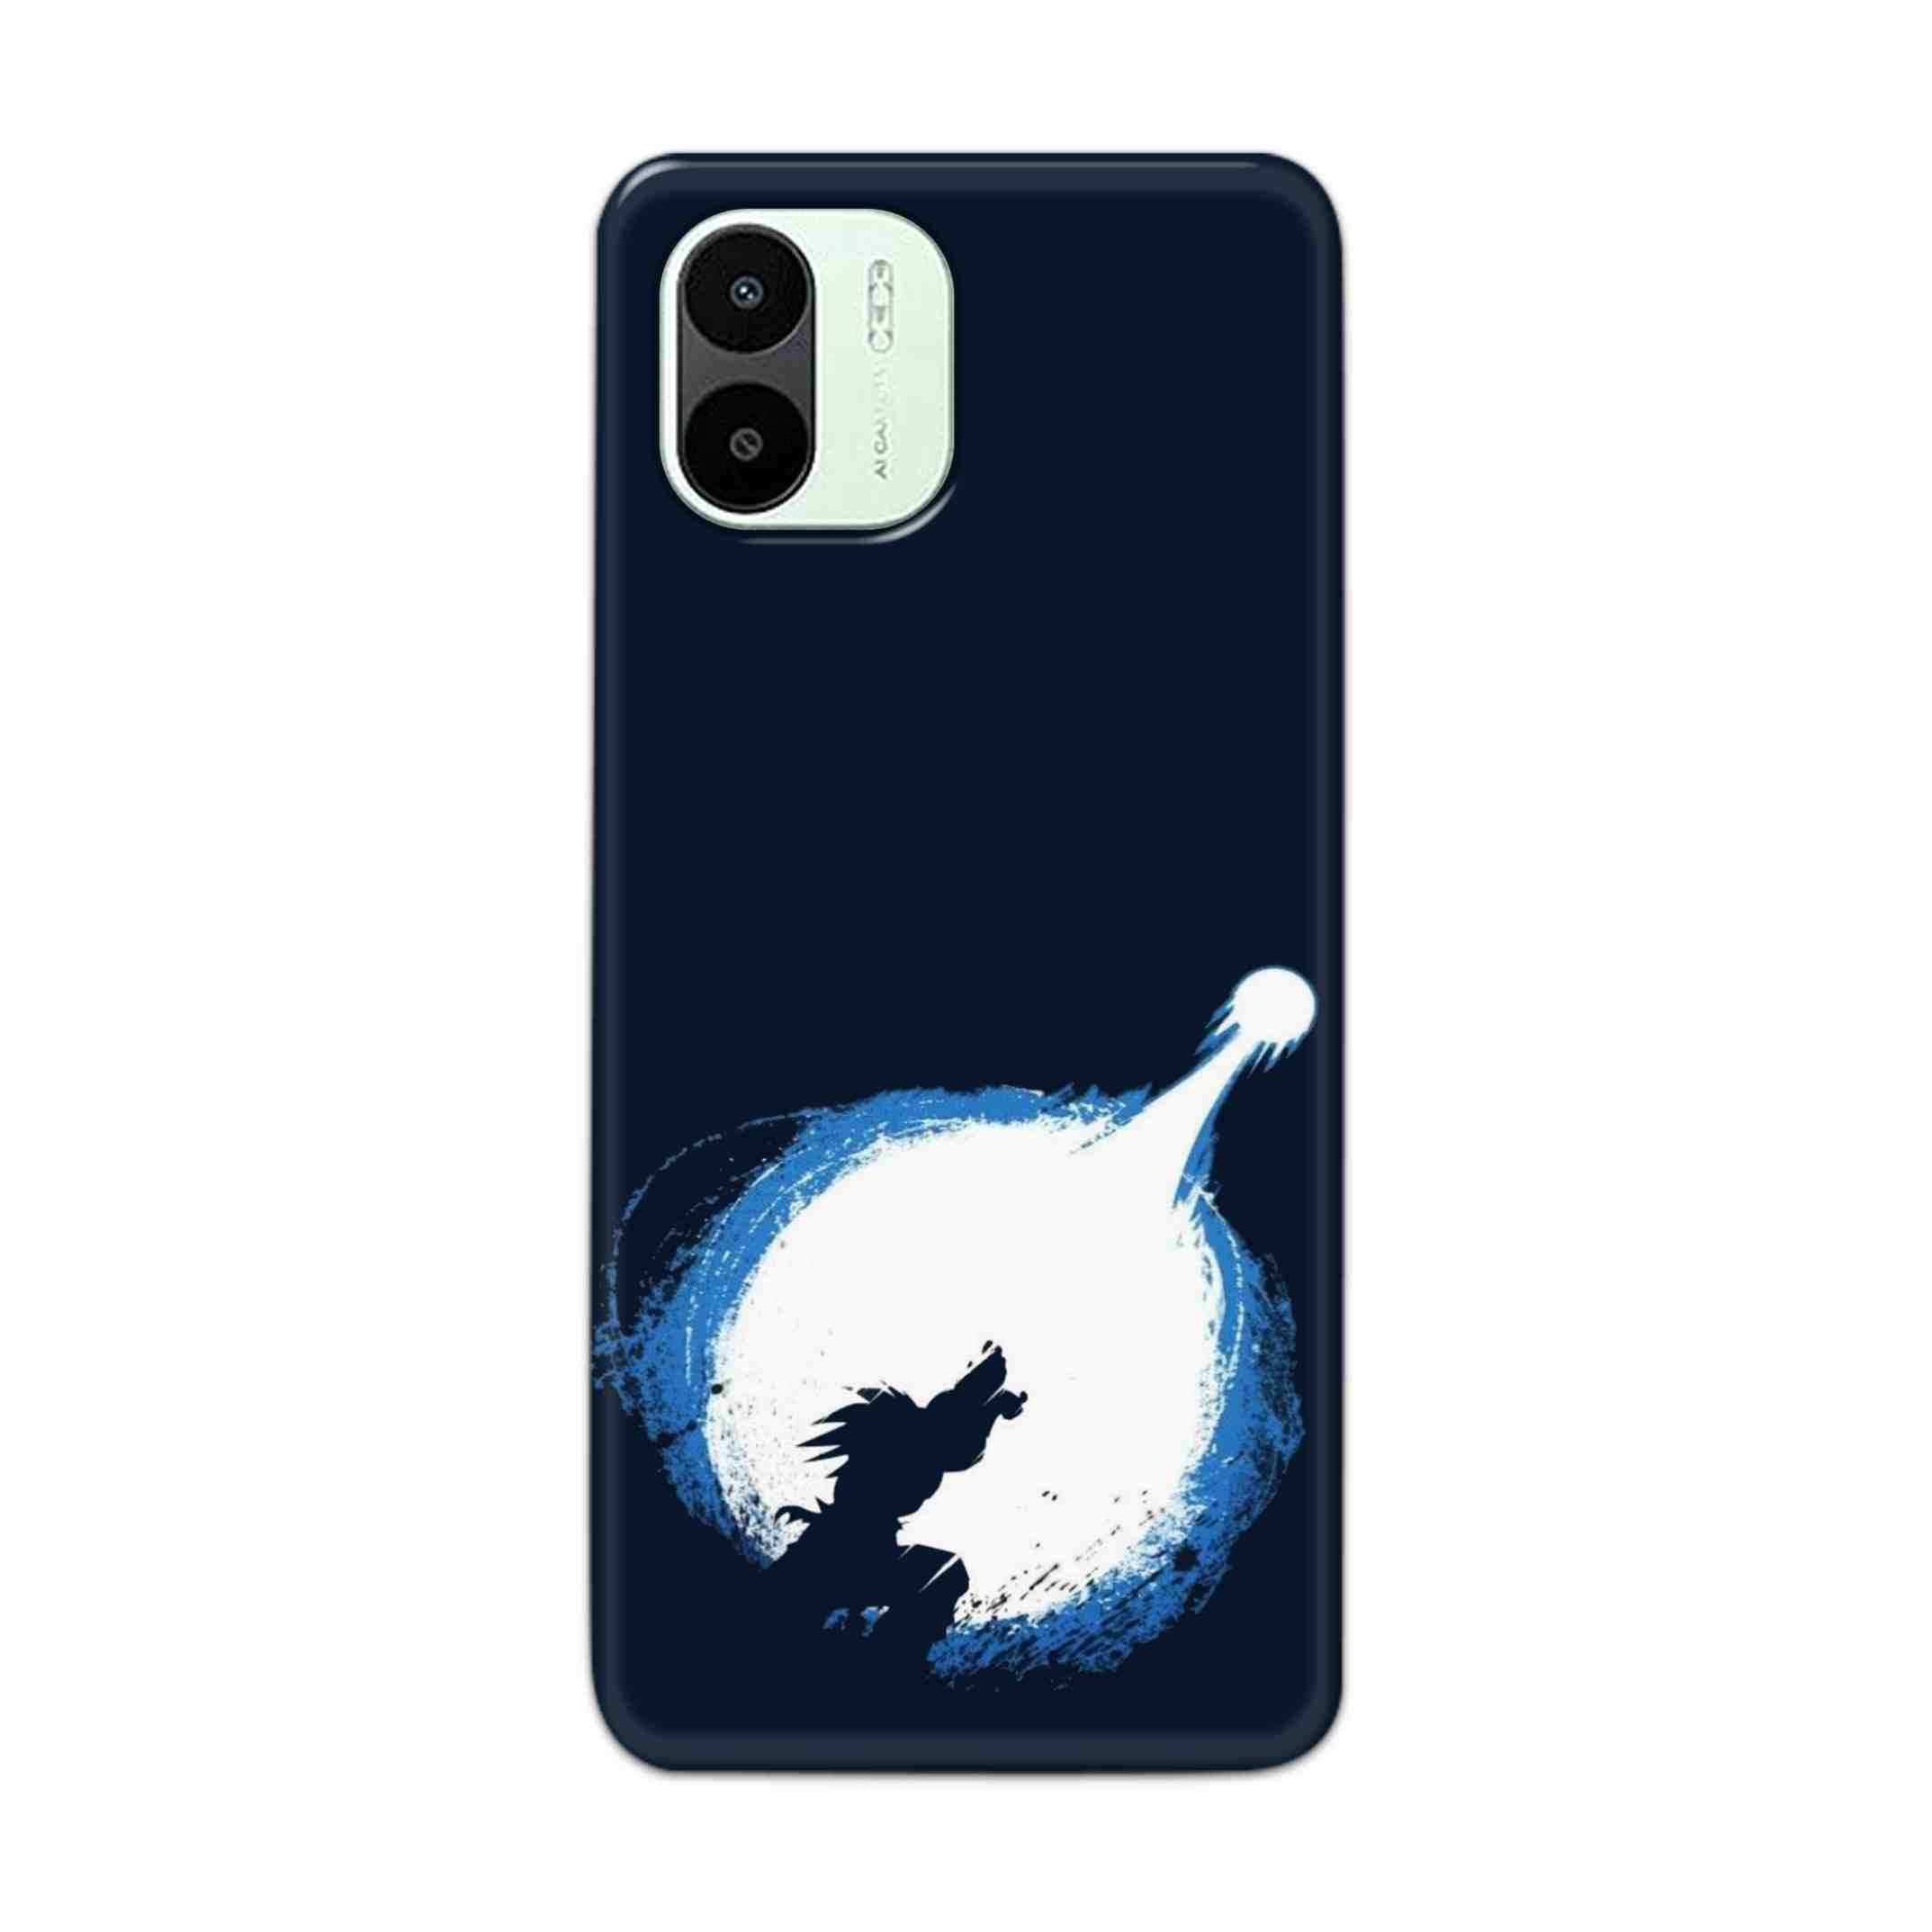 Buy Goku Power Hard Back Mobile Phone Case Cover For Xiaomi Redmi A1 5G Online